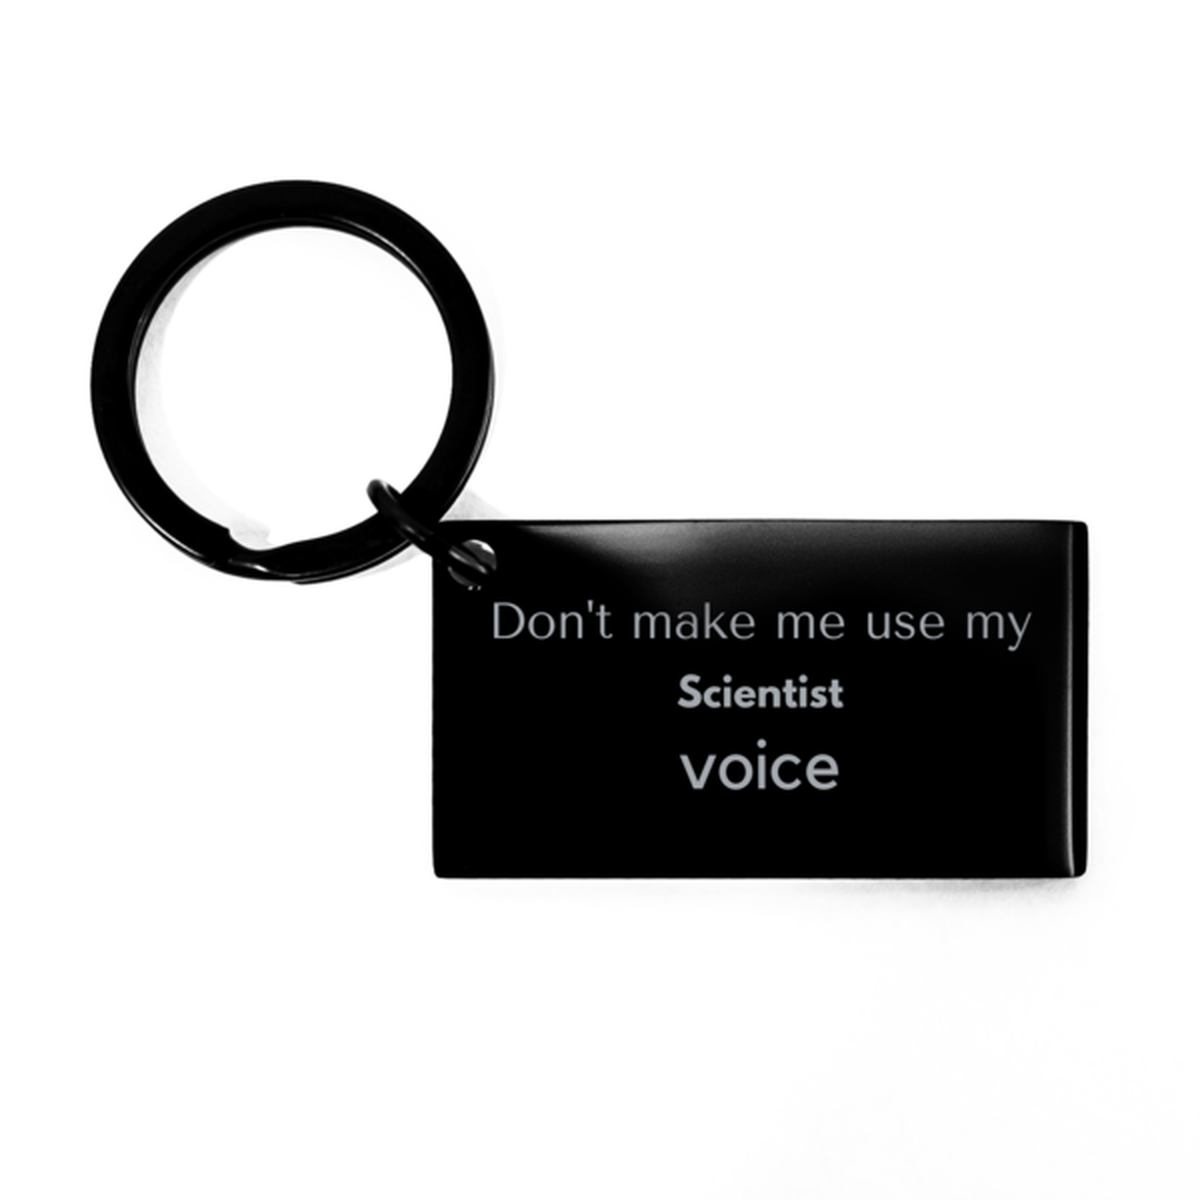 Don't make me use my Scientist voice, Sarcasm Scientist Gifts, Christmas Scientist Keychain Birthday Unique Gifts For Scientist Coworkers, Men, Women, Colleague, Friends